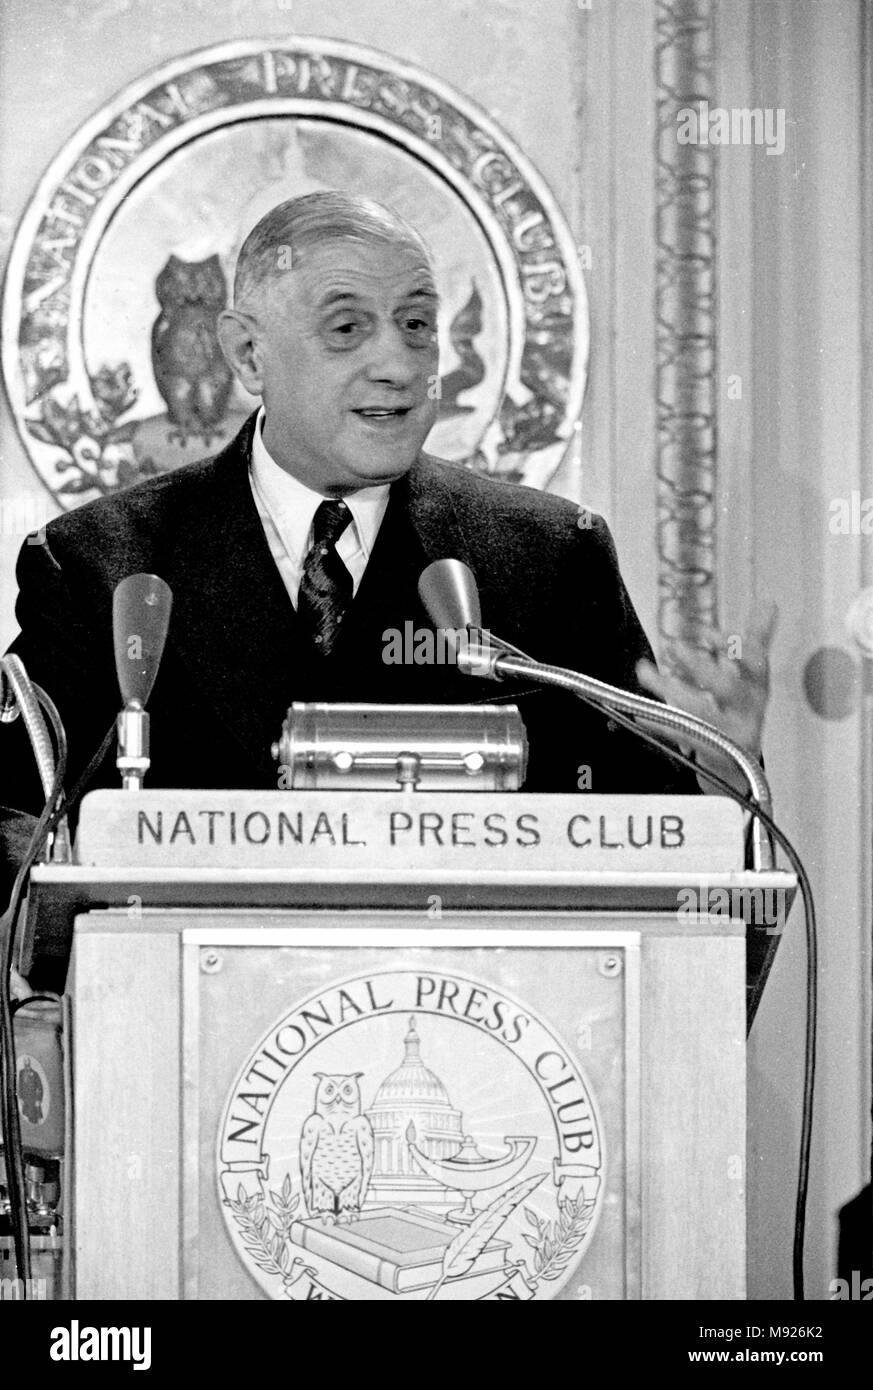 Washington, District of Columbia, USA. 23rd Apr, 1960. President Charles de Gaulle of France speaks at the National Press Club in Washington, DC on April 23, 1960. President de Gaulle is in Washington for a State visit to focus on talks with United States President Dwight D. Eisenhower in anticipation of the upcoming Big Four summit in May in Paris. It will be the first such meeting of leaders from the US, Great Britain, France, and the Soviet Union since World War II.Credit: Benjamin E. ''Gene'' Forte/CNP Credit: Benjamin E. ''Gene'' Forte/CNP/ZUMA Wire/Alamy Live News Stock Photo